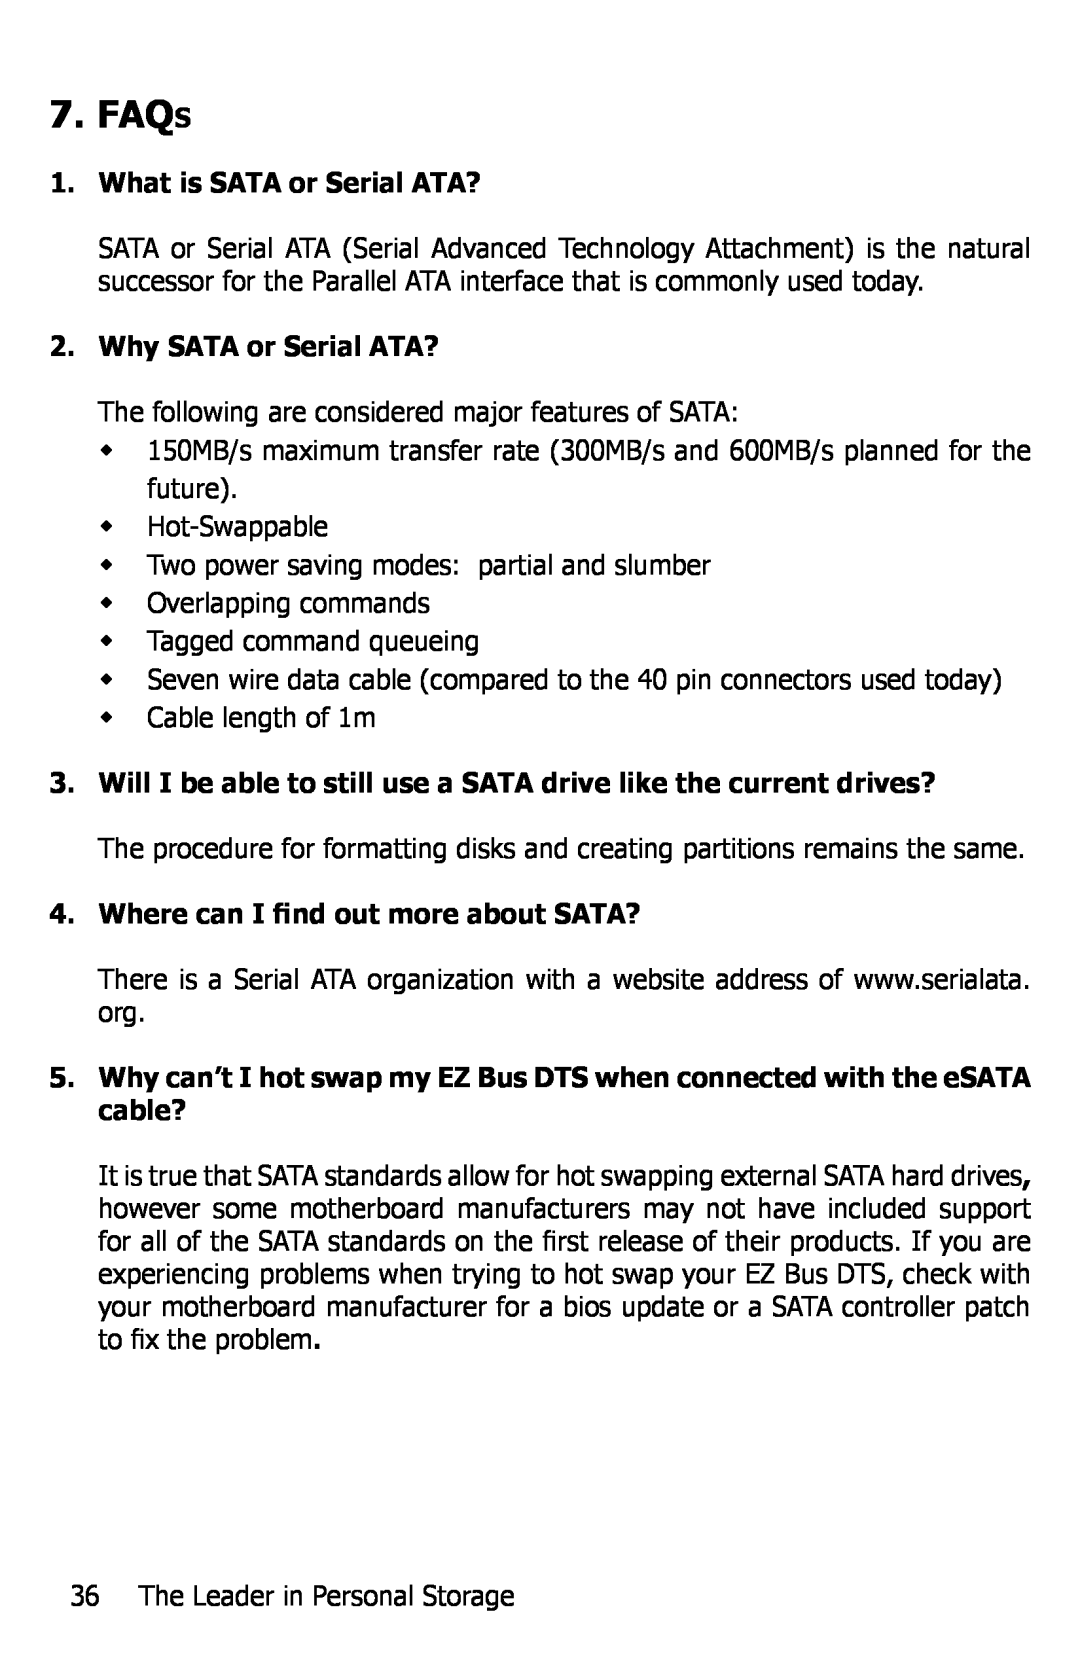 Apricorn EZ Bus DTS FAQs, What is SATA or Serial ATA?, Why SATA or Serial ATA?, Where can I find out more about SATA? 